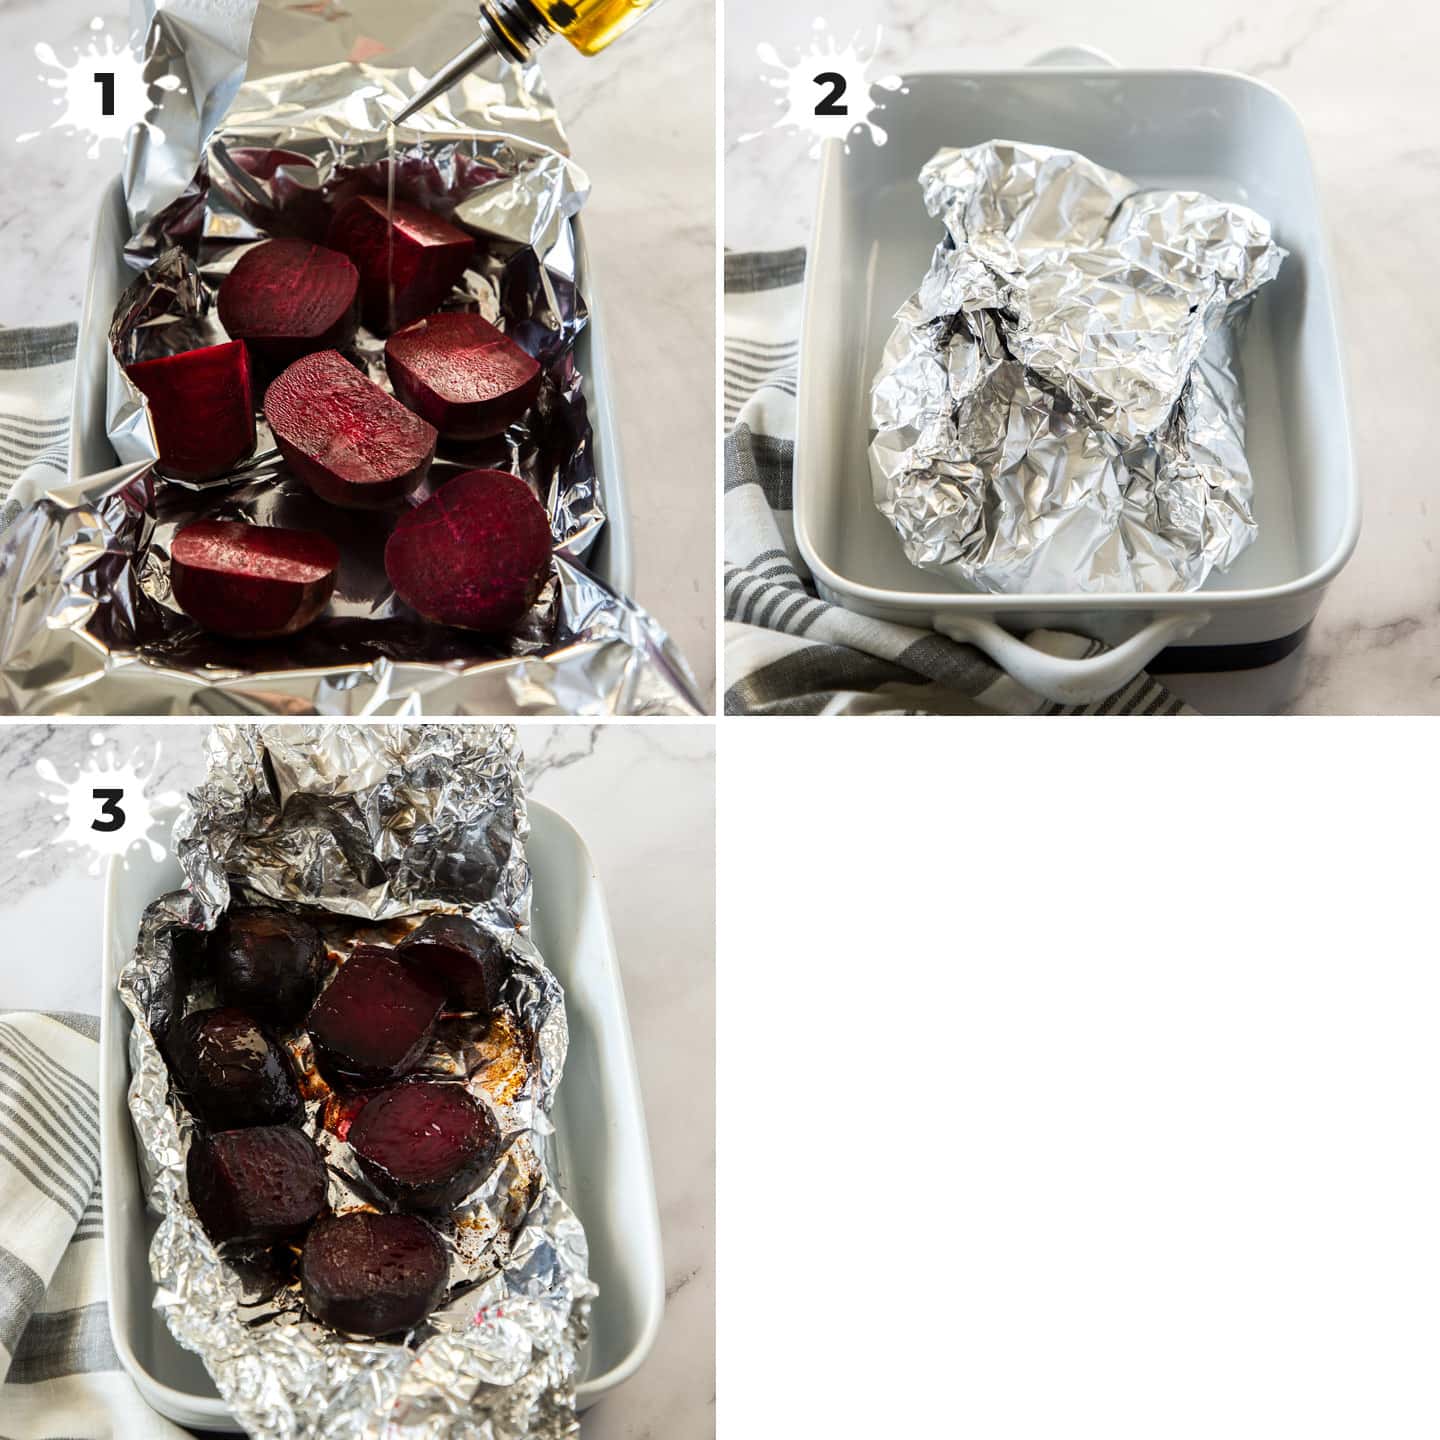 Beetroots in foil in a white casserole dish.